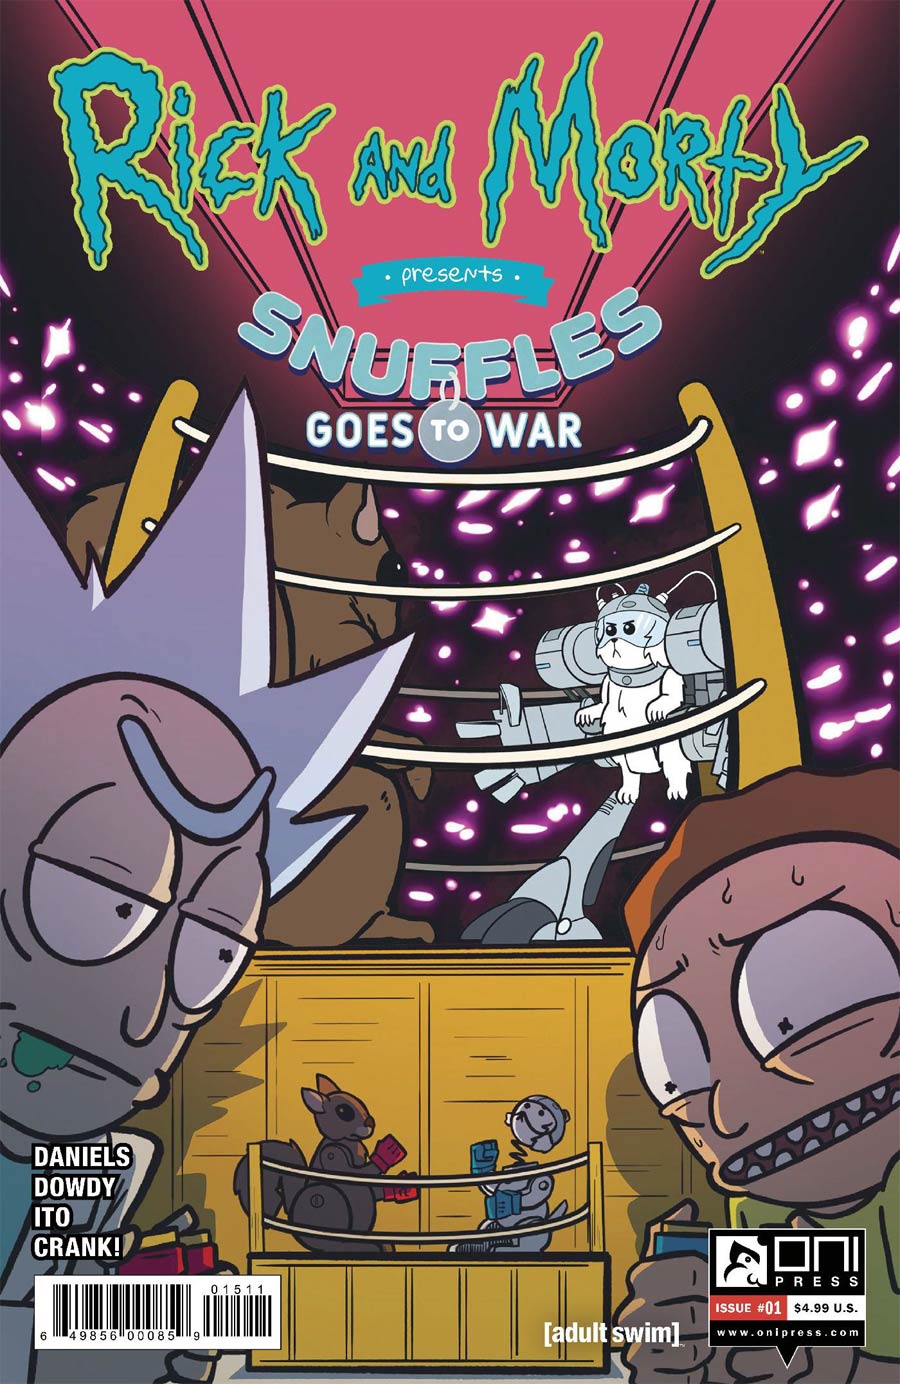 Rick And Morty Presents Snuffles Goes To War #1 (One Shot) Cover A Regular Devaun Dowdy Cover